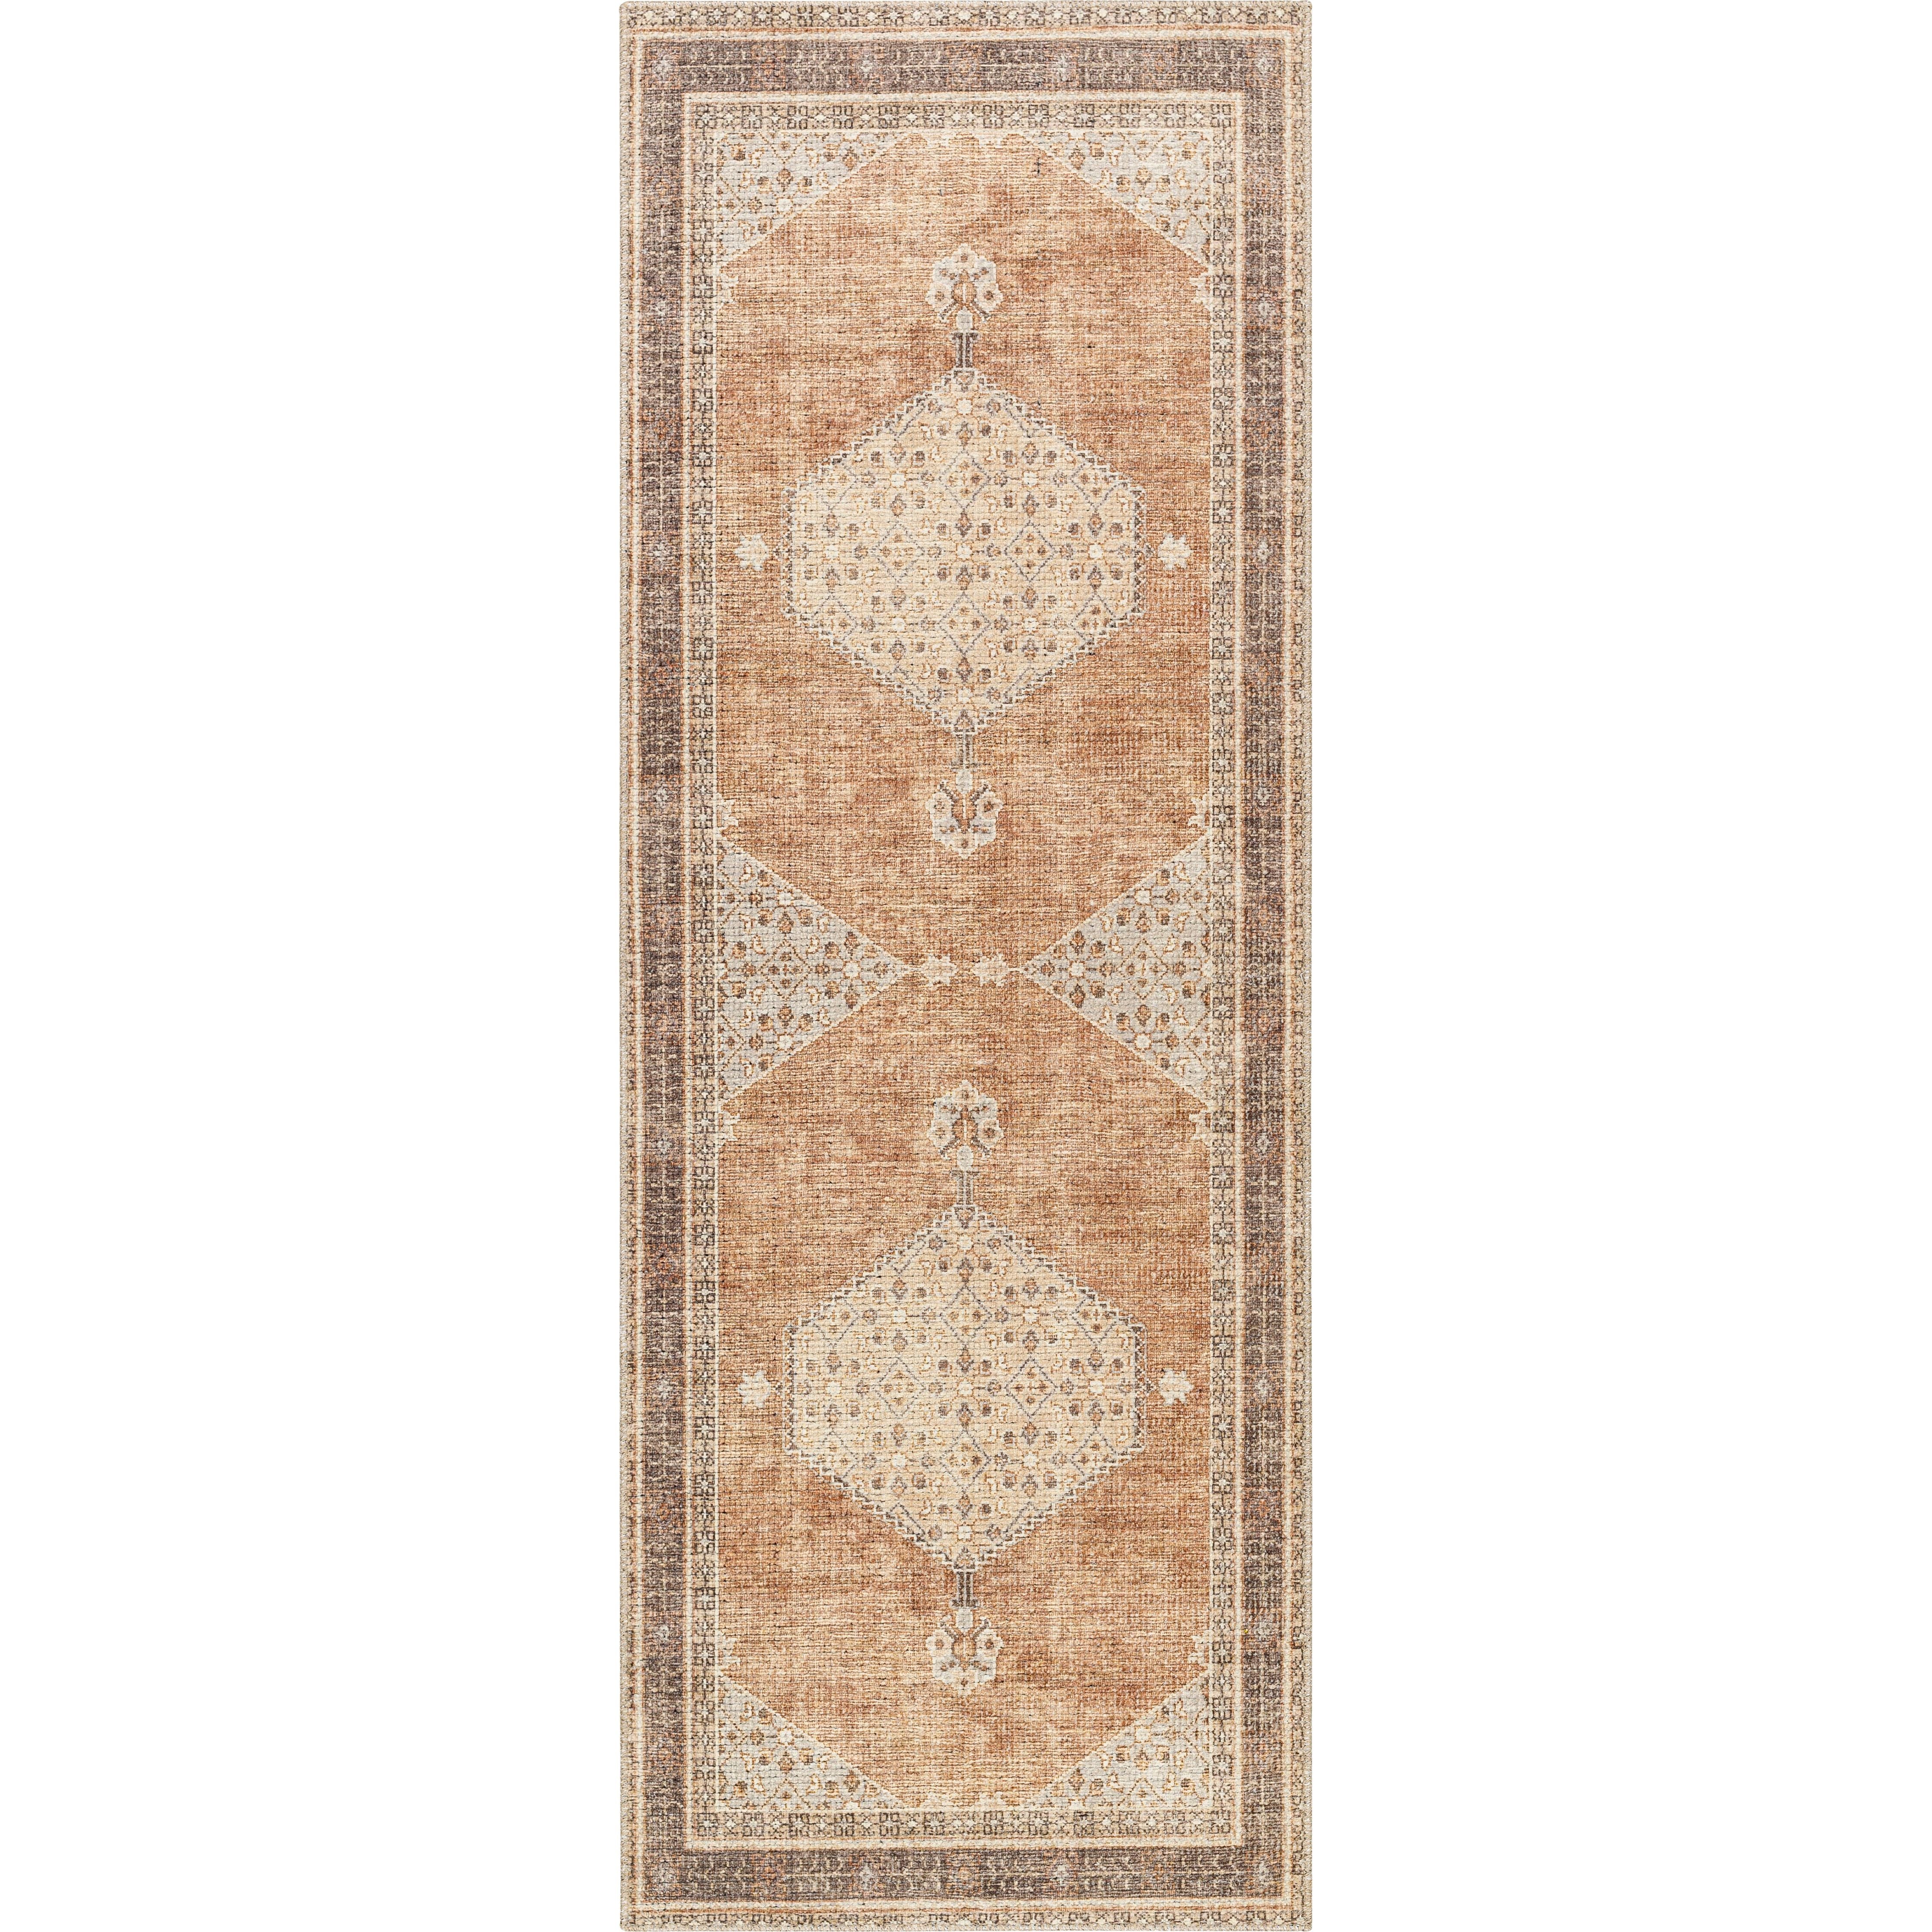 Brought to you by Becki Owens x Surya, the Lila Tan medallion area rug combines rich, detailed design with warm soft neutrals and tones to create an inviting space that will always feel familiar. Amethyst Home provides interior design, new construction, custom furniture, and area rugs in the Des Moines metro area.